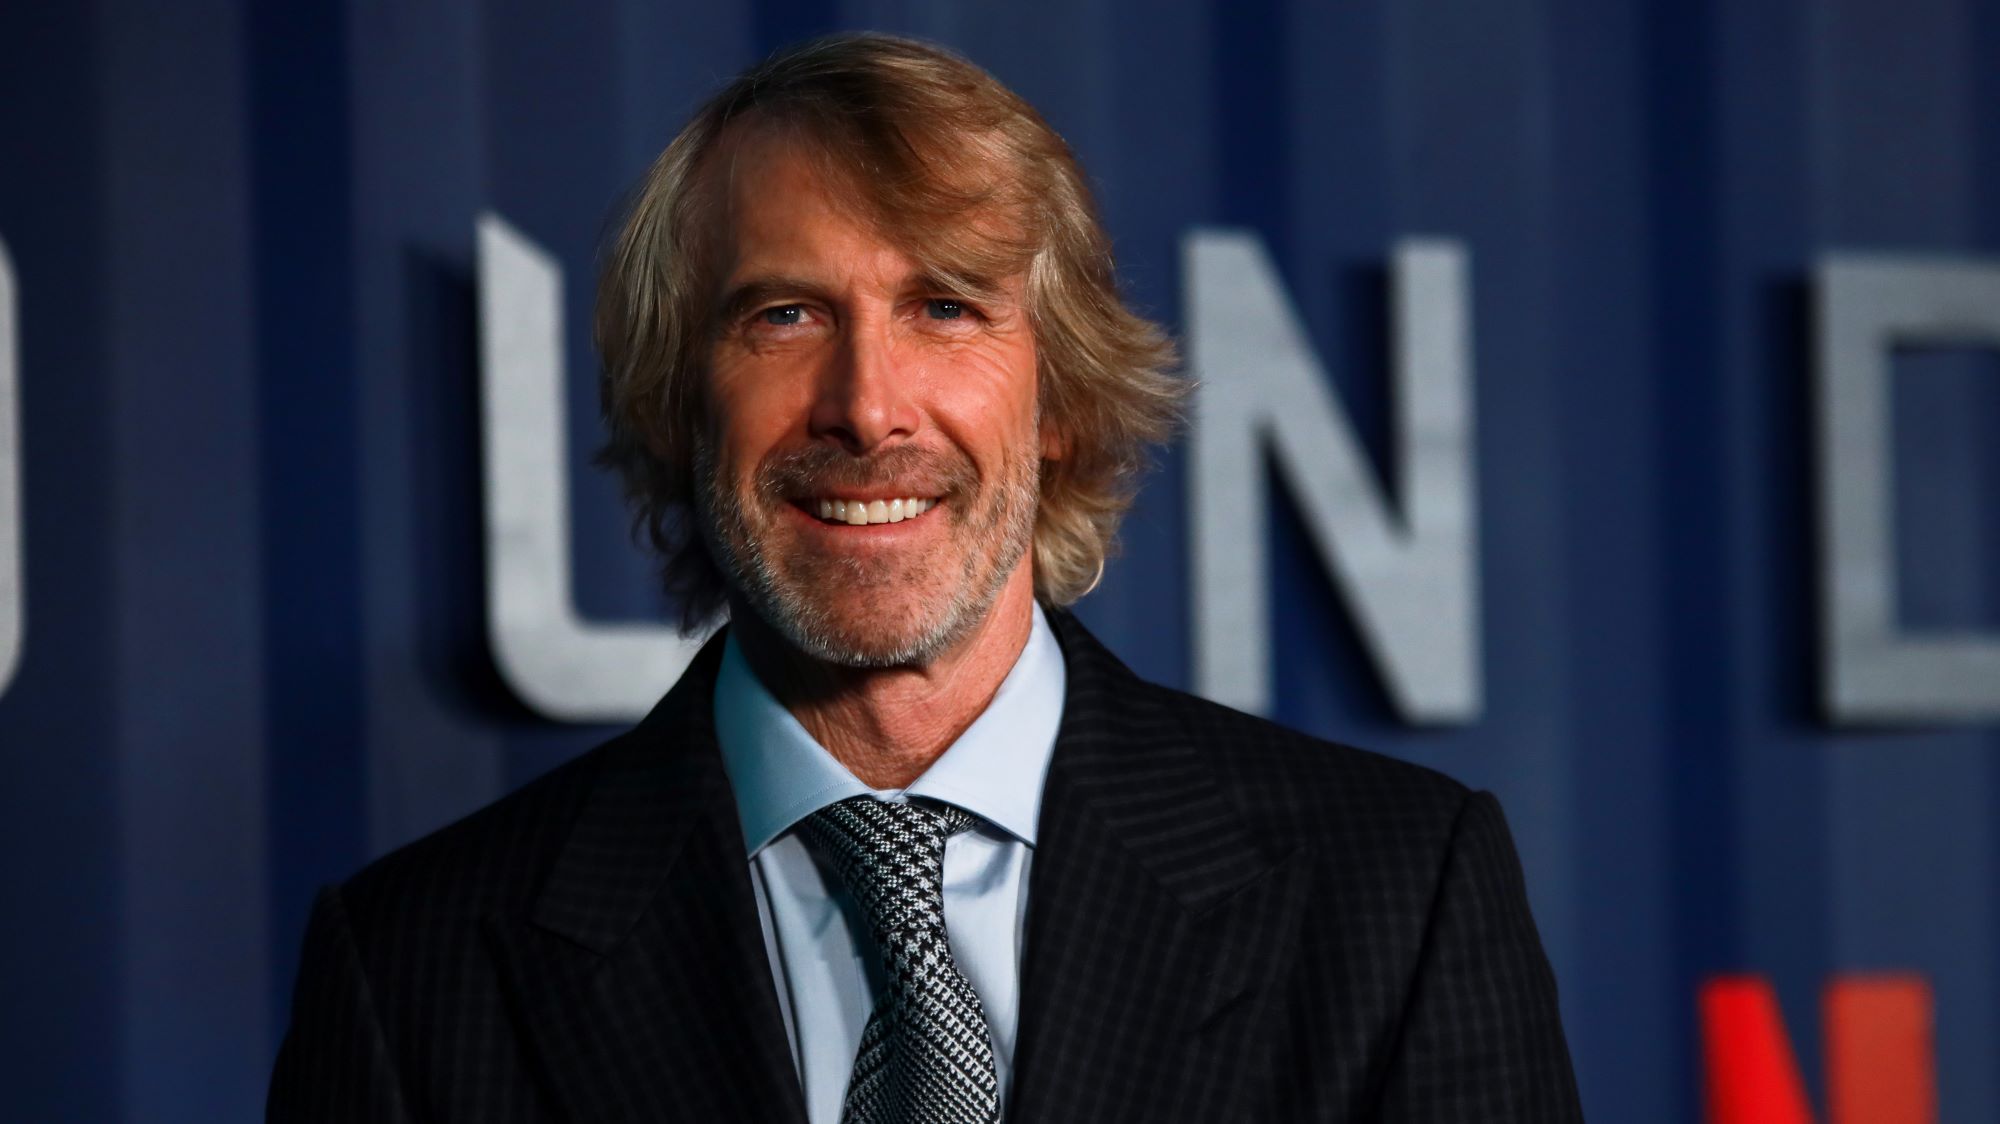 Michael Bay from 'Bad Boys' standing in front of a blue background with white letters dressed in a suit.